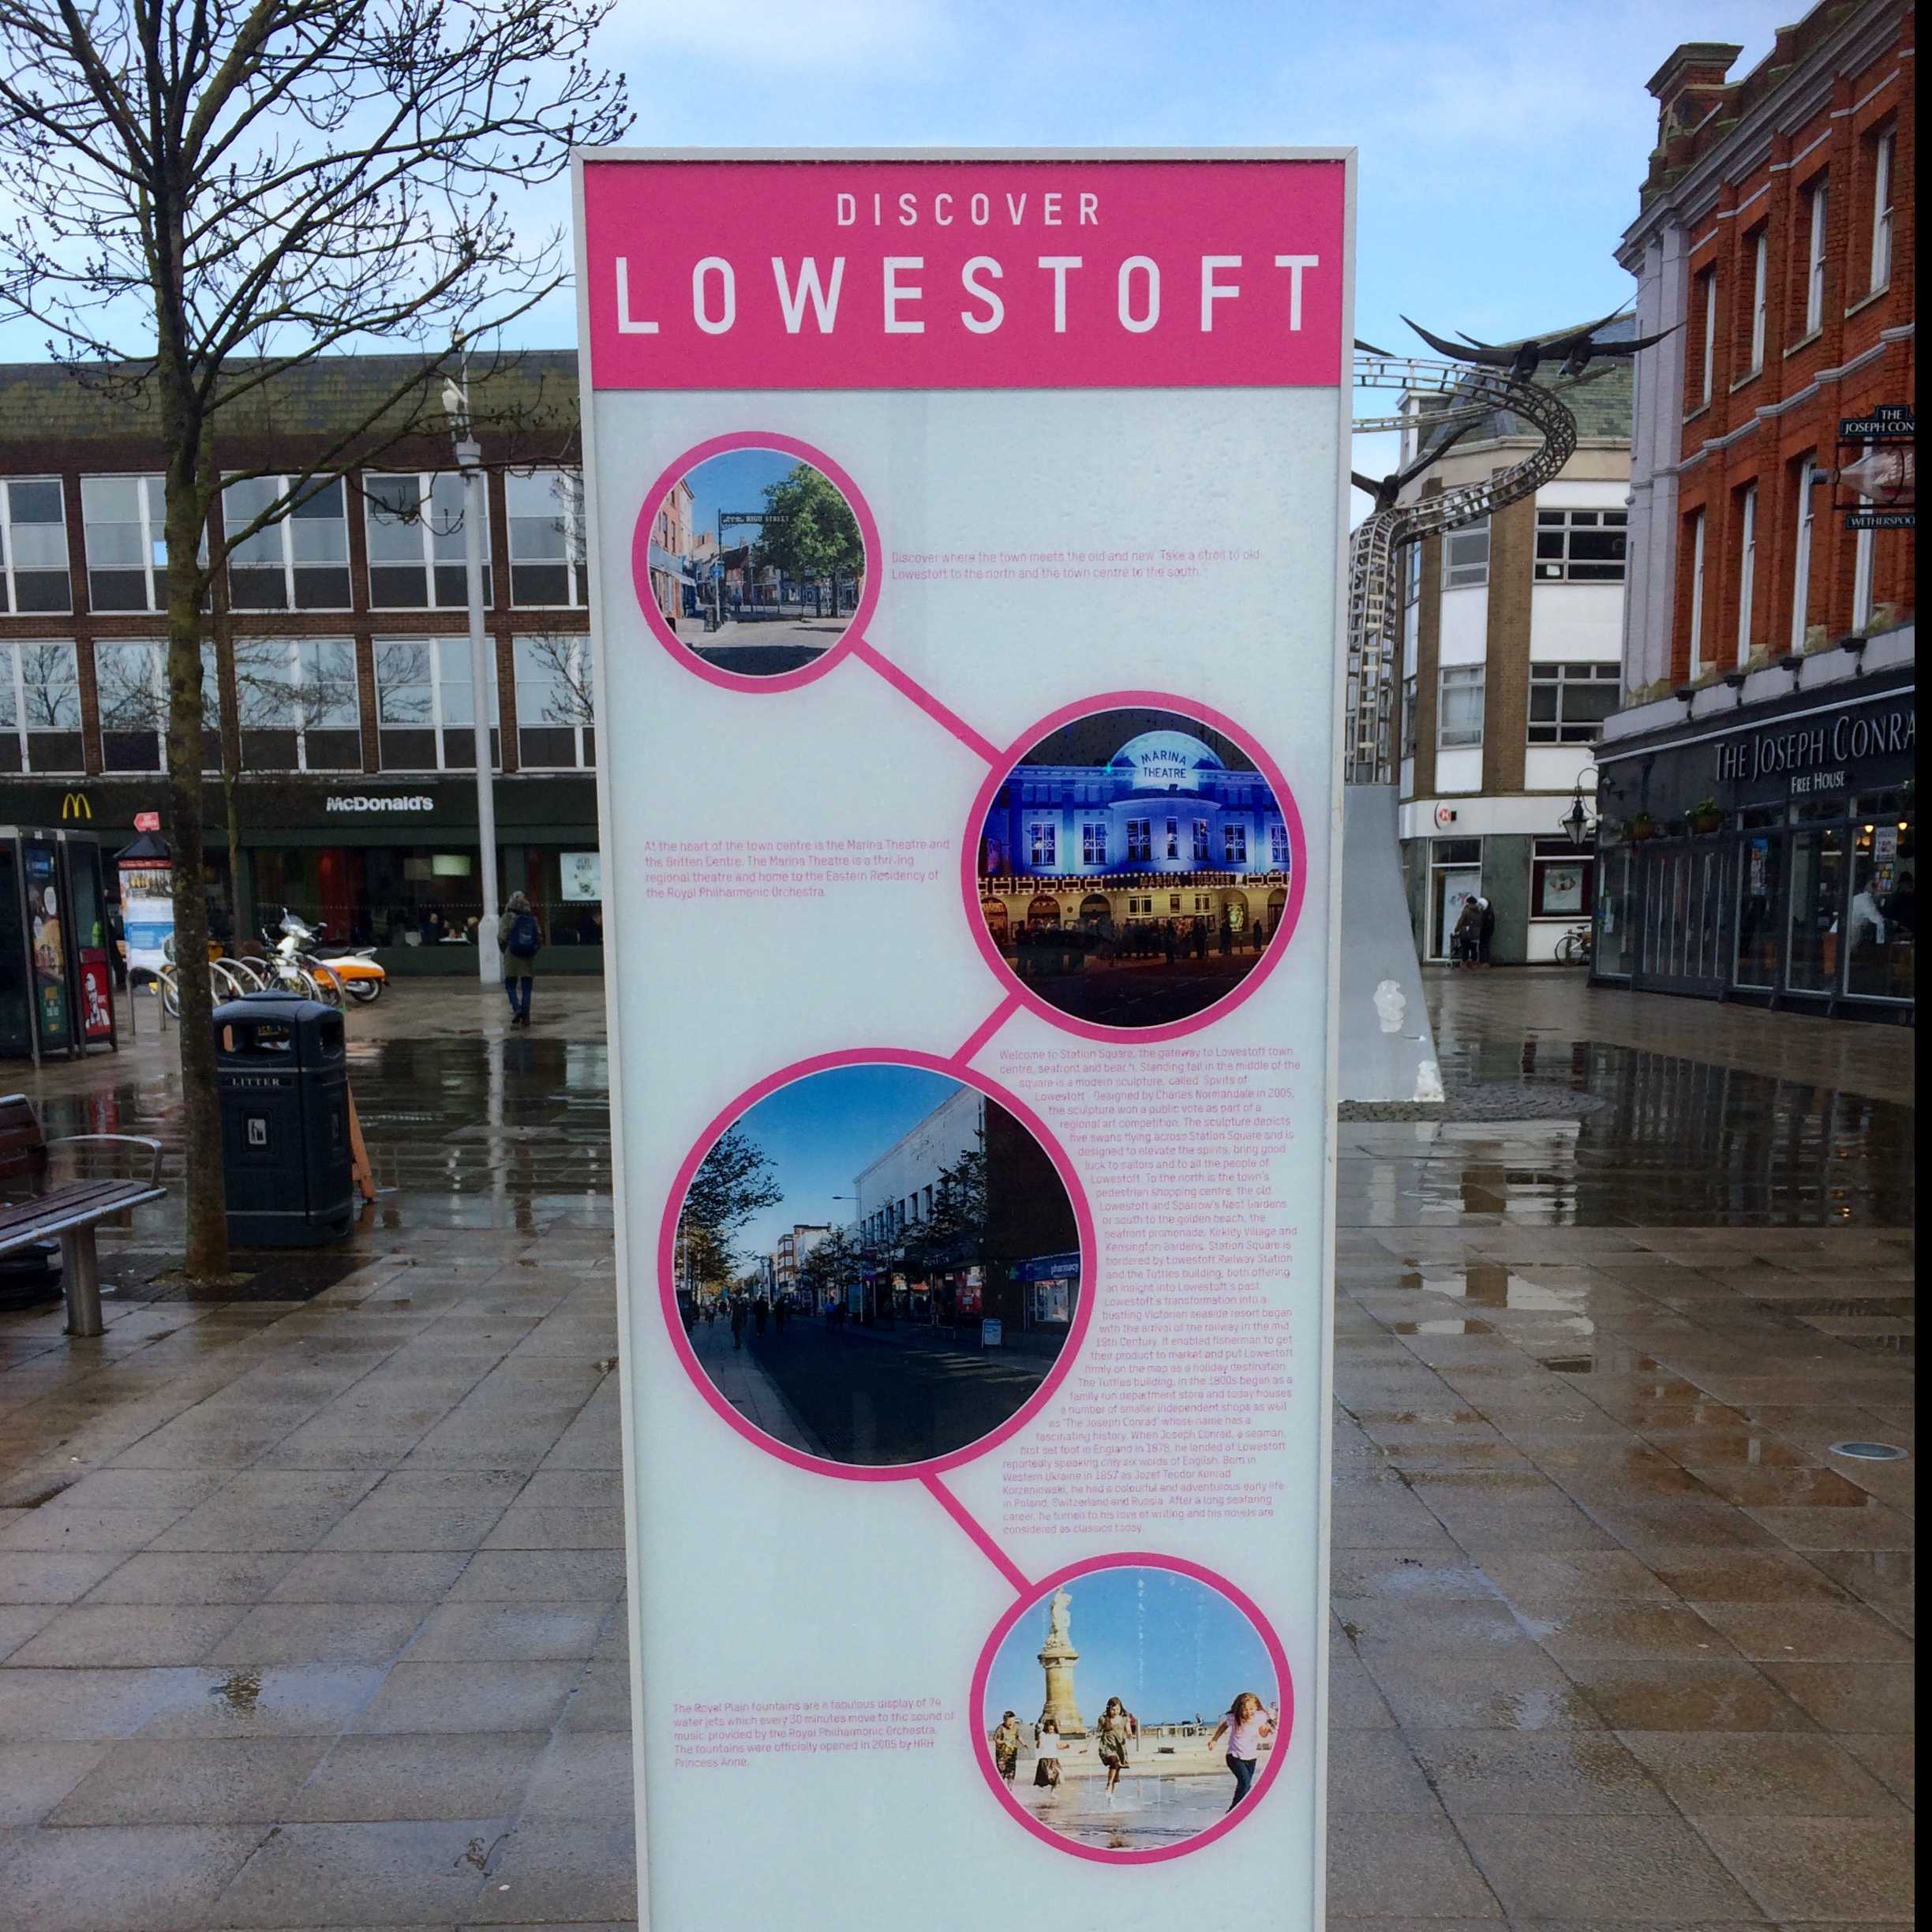 Find your way with Discover Lowestoft Image